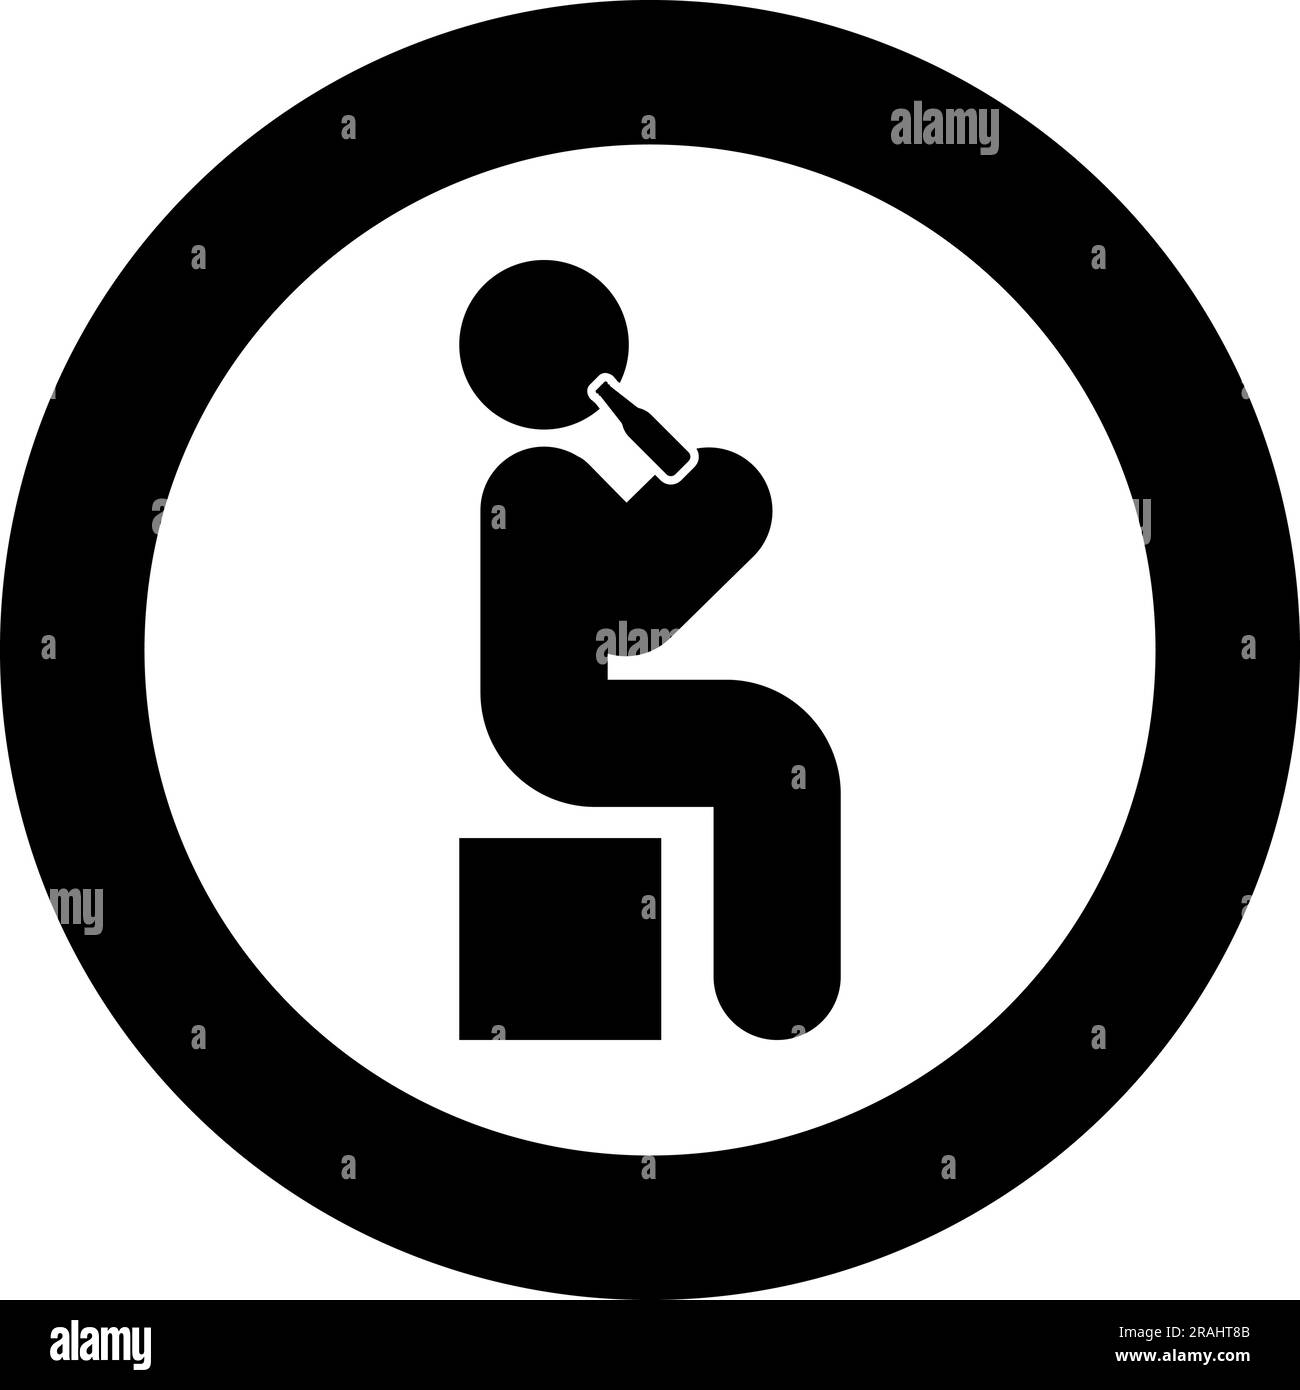 Man human drinking water alcohol beer from bottle sitting position icon in circle round black color vector illustration image solid outline style Stock Vector